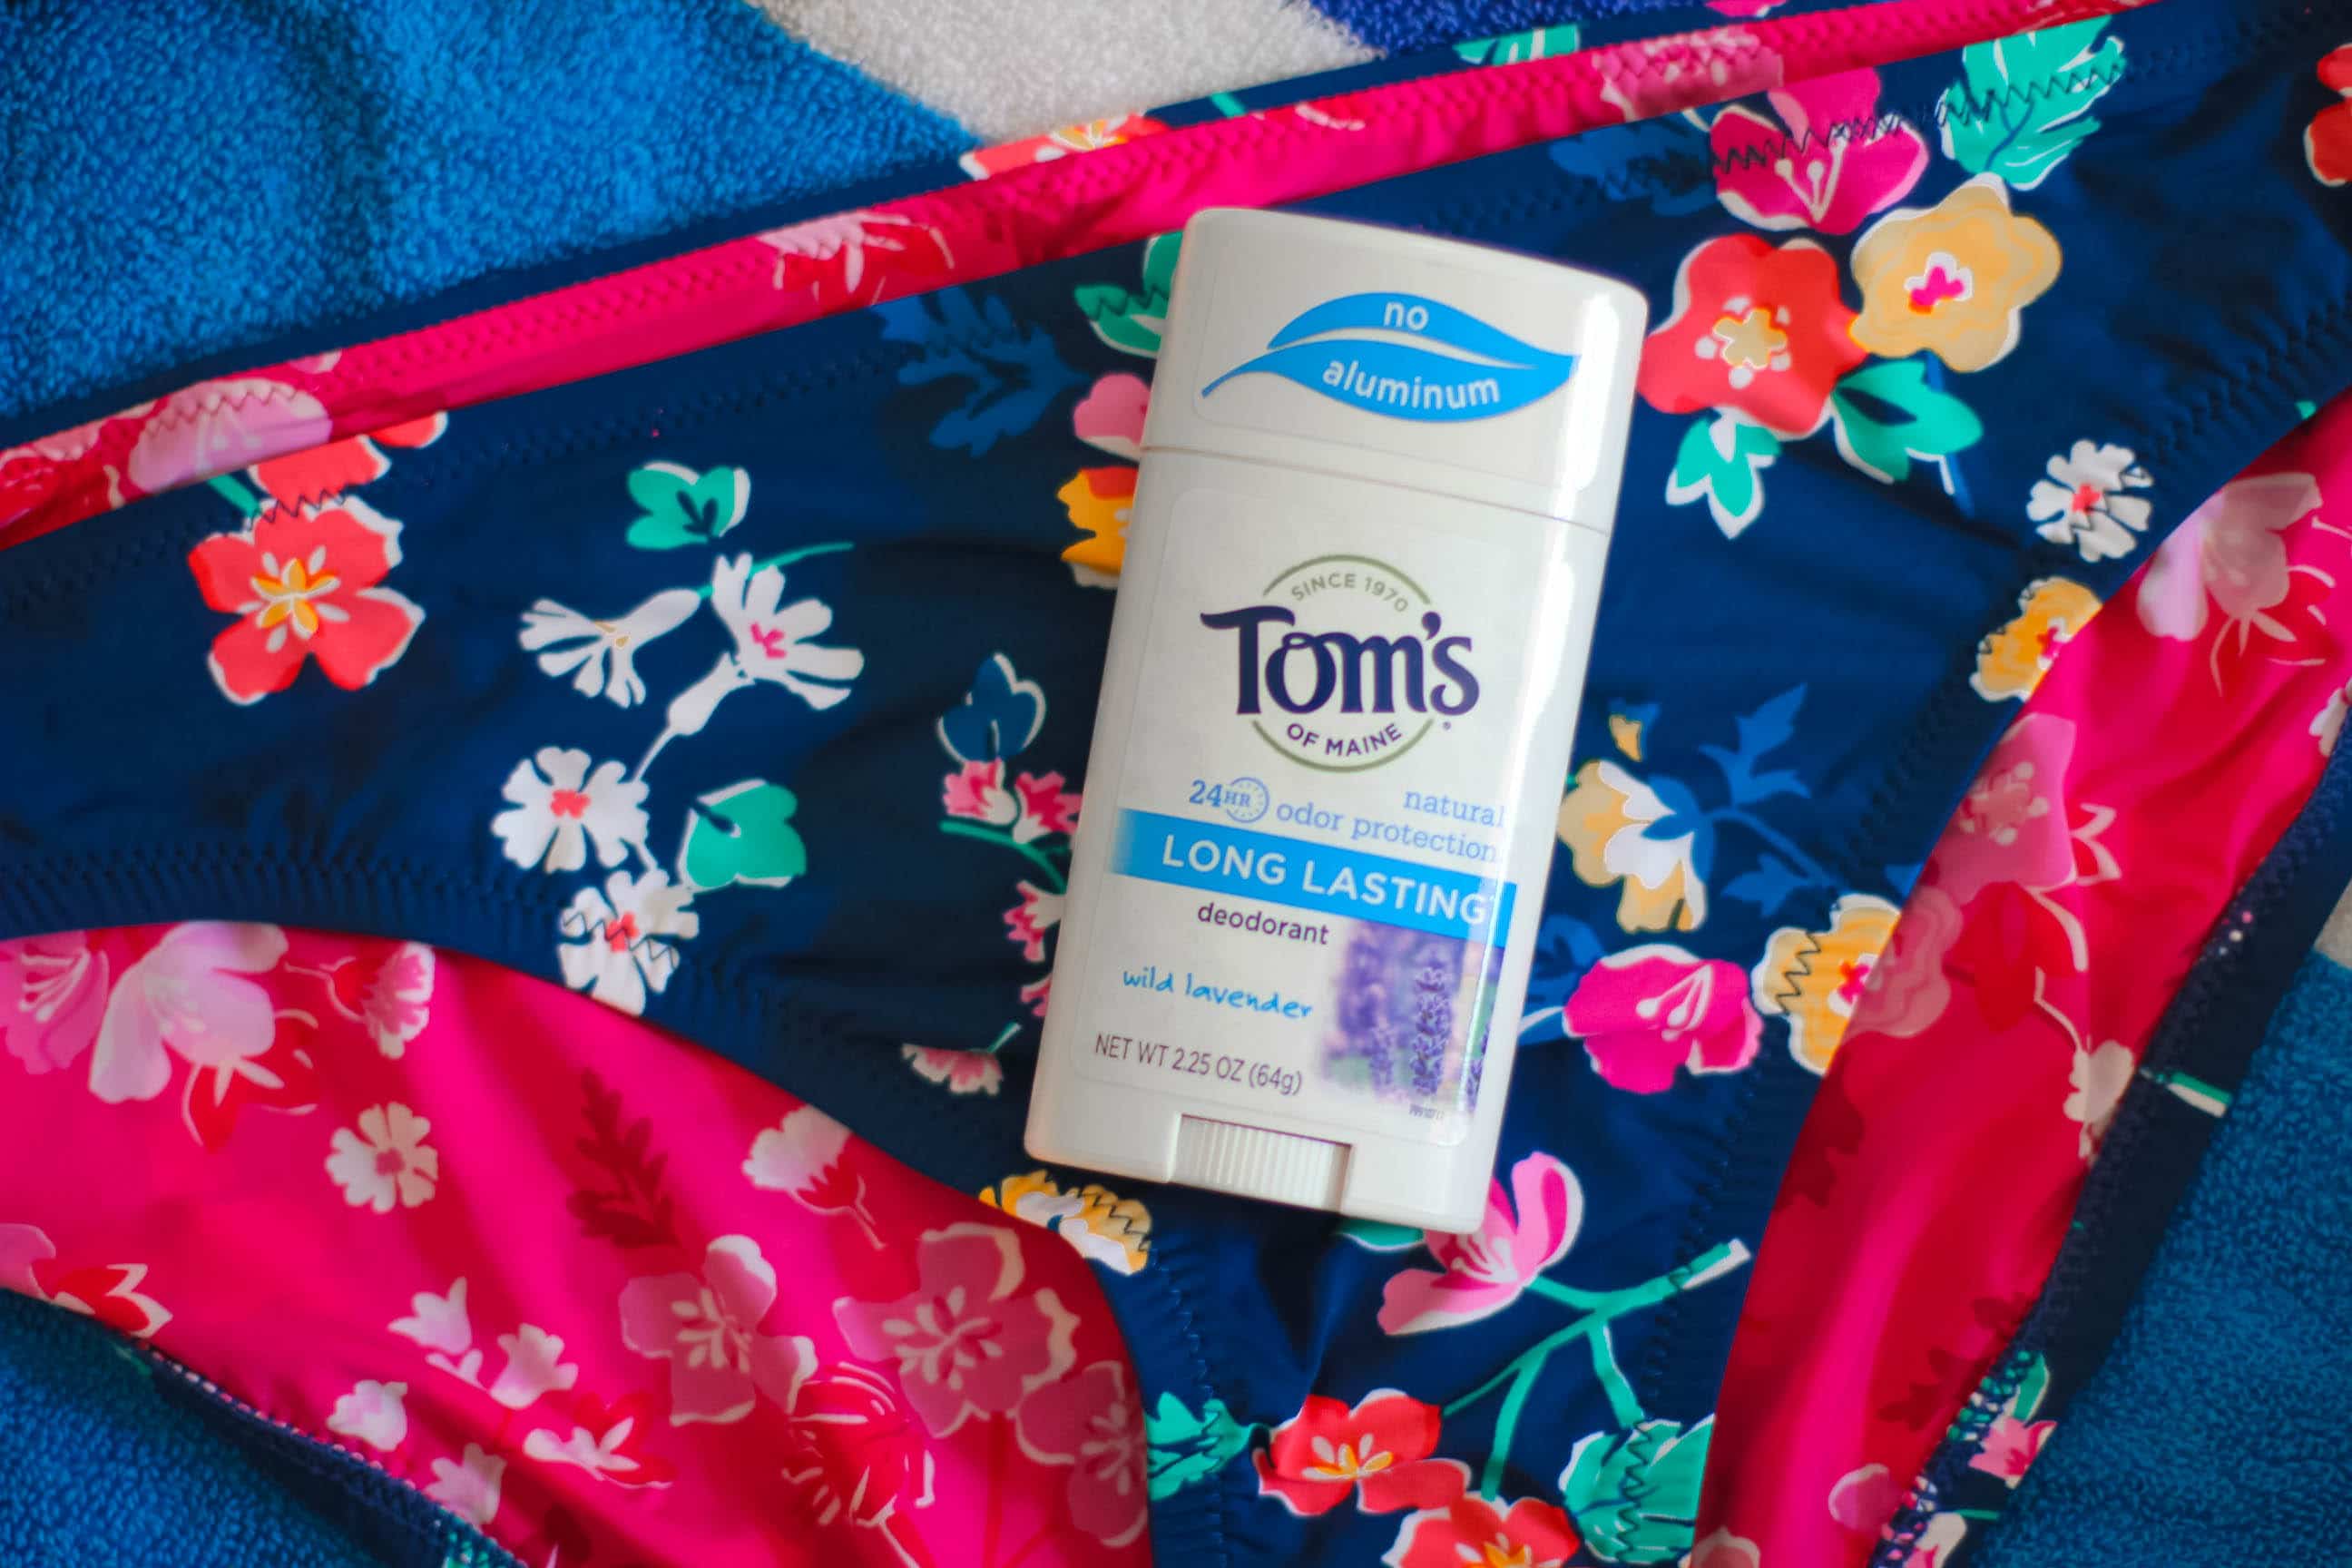 missyonmadison, missyonmadison instagram, melissa tierney, melissa tierney instagram, fashion blogger, beauty blogger, beauty buys, toms of maine, deodorant, stay fresh, fresh summer picks, whats in my bag, whats in my beach bag, hygiene, summer hygiene tips,